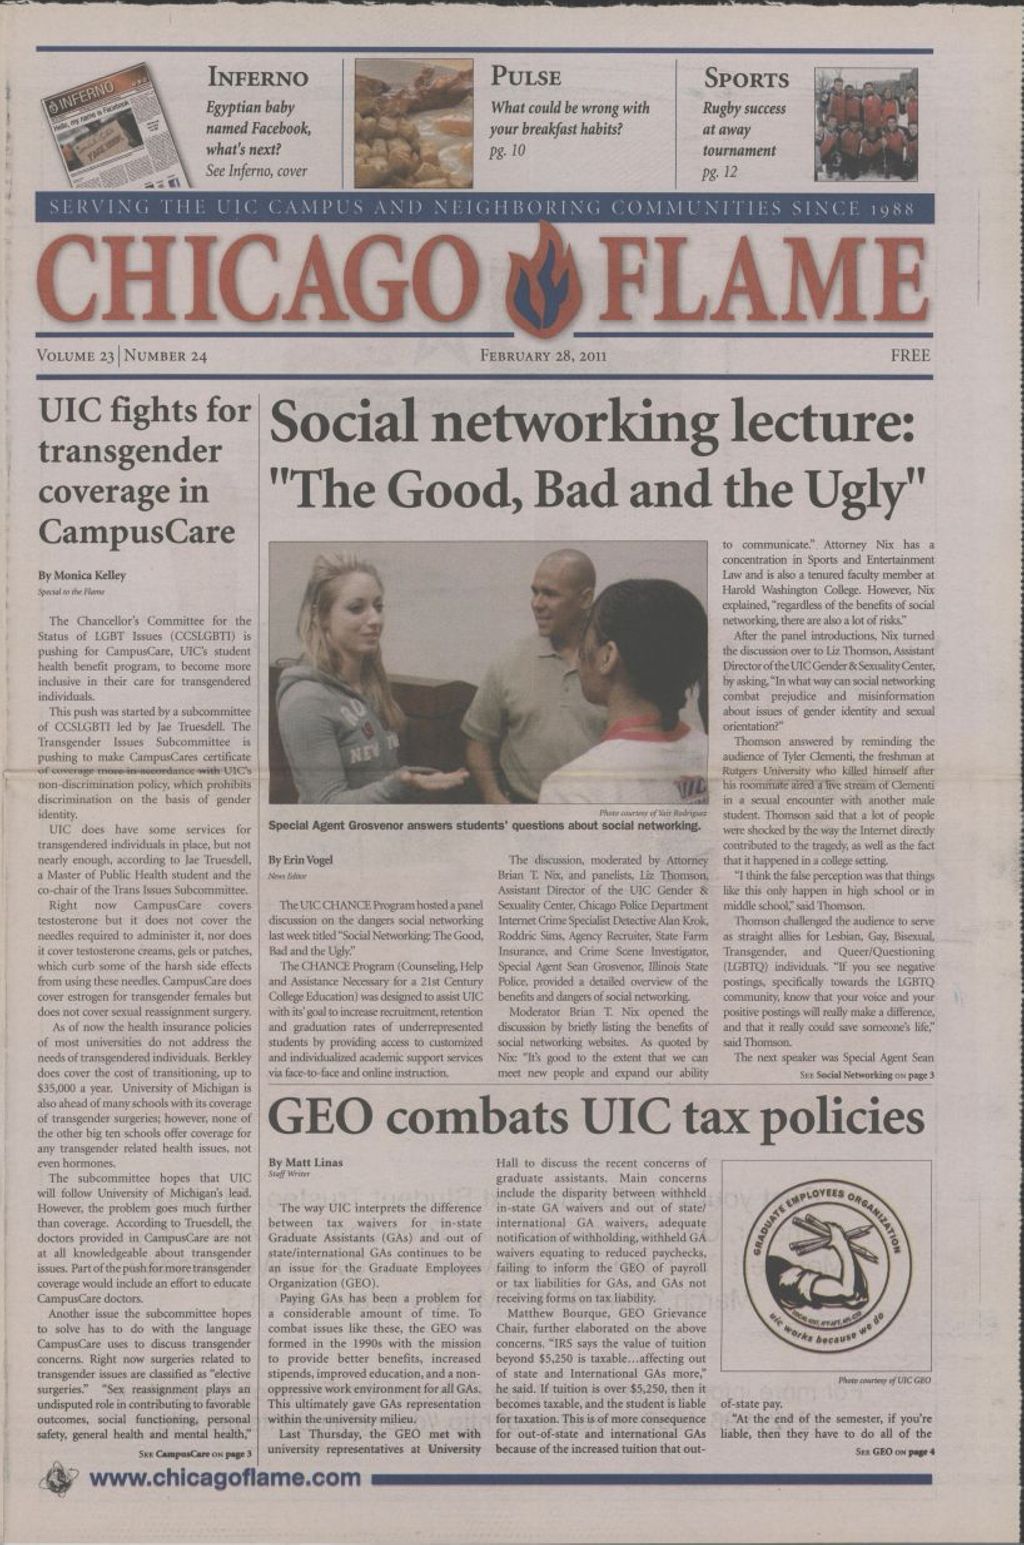 Miniature of Chicago Flame (February 28, 2011)